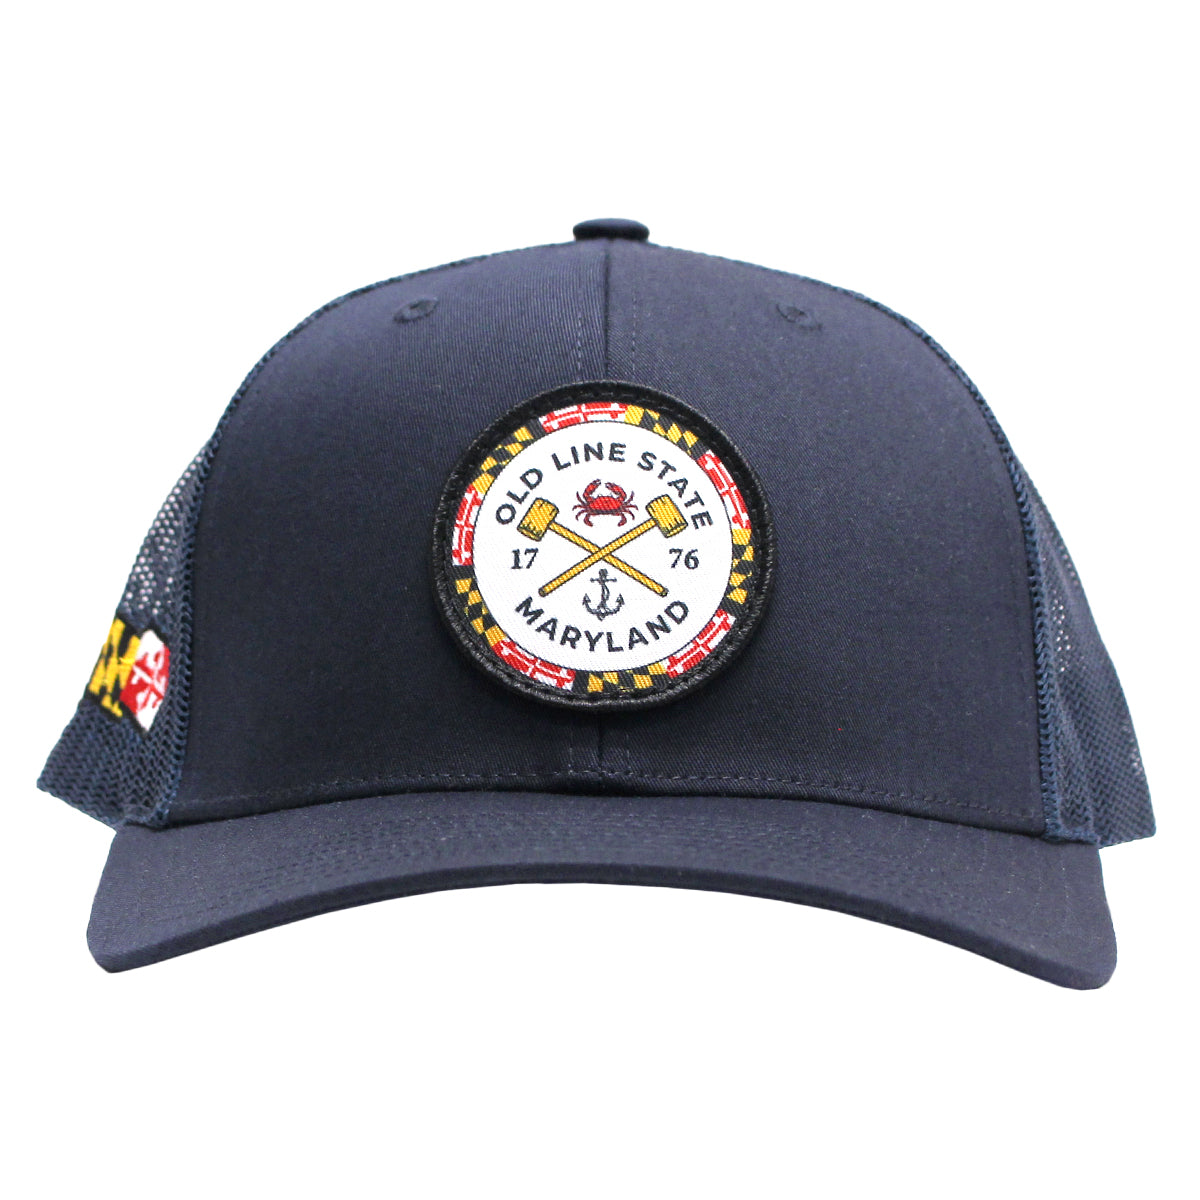 Old Line State Woven Patch w/ Side MD Flag (Navy) / Trucker Hat - Route One Apparel